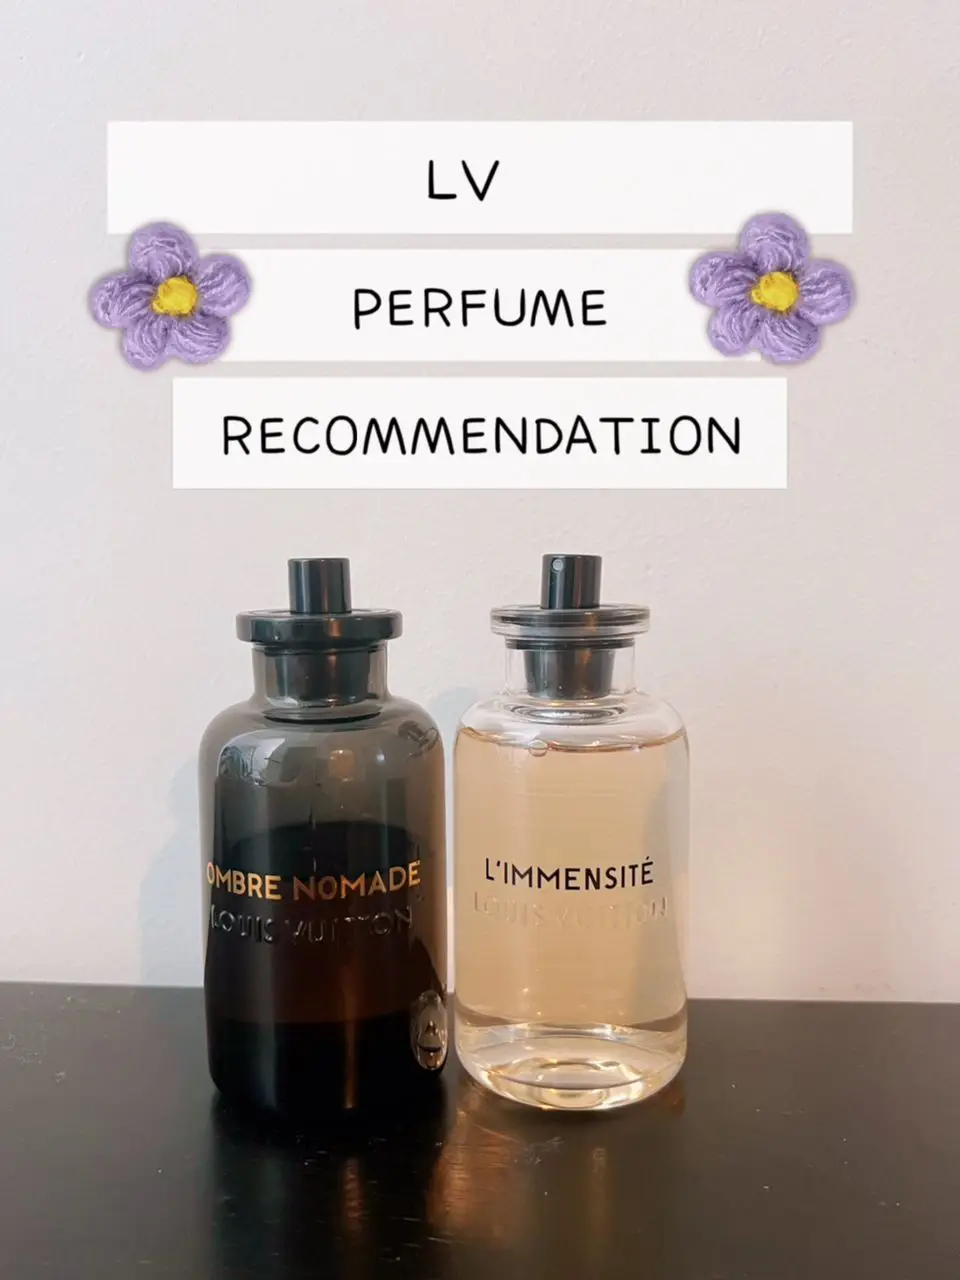 Unboxing a popular Louis Vuitton ombre nomade dupe! #fragrance